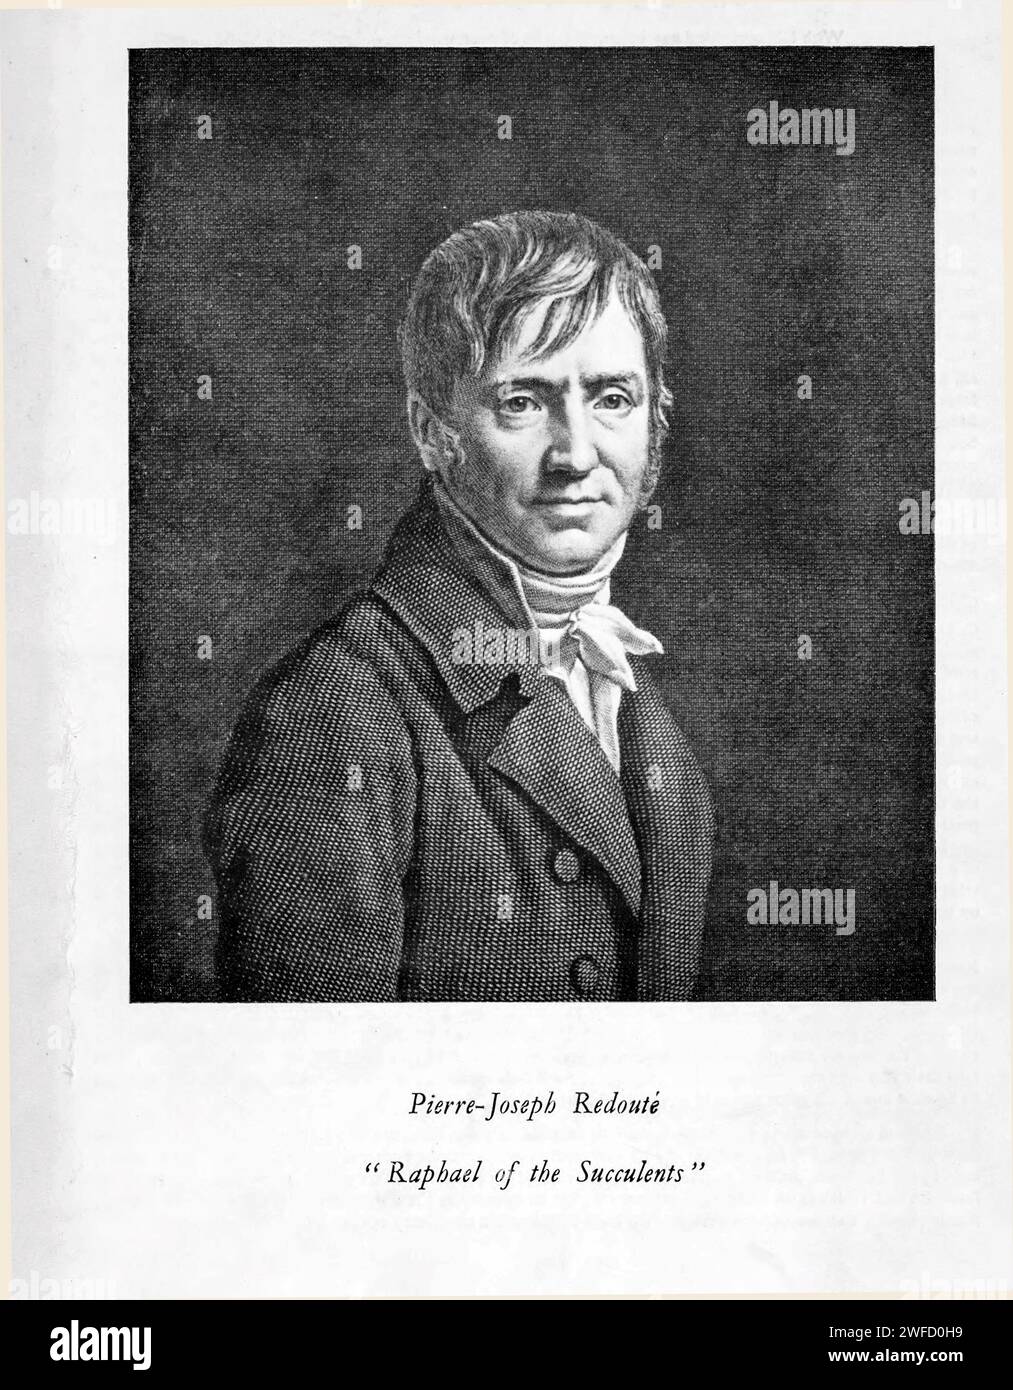 Portrait of Pierre-Joseph Redouté (10 July 1759 – 19 June 1840), was a painter and botanist from Belgium, known for his watercolours of roses, lilies and other flowers at the Château de Malmaison, many of which were published as large coloured stipple engravings. He was nicknamed 'the Raphael of flowers' and has been called the greatest botanical illustrator of all time. Stock Photo